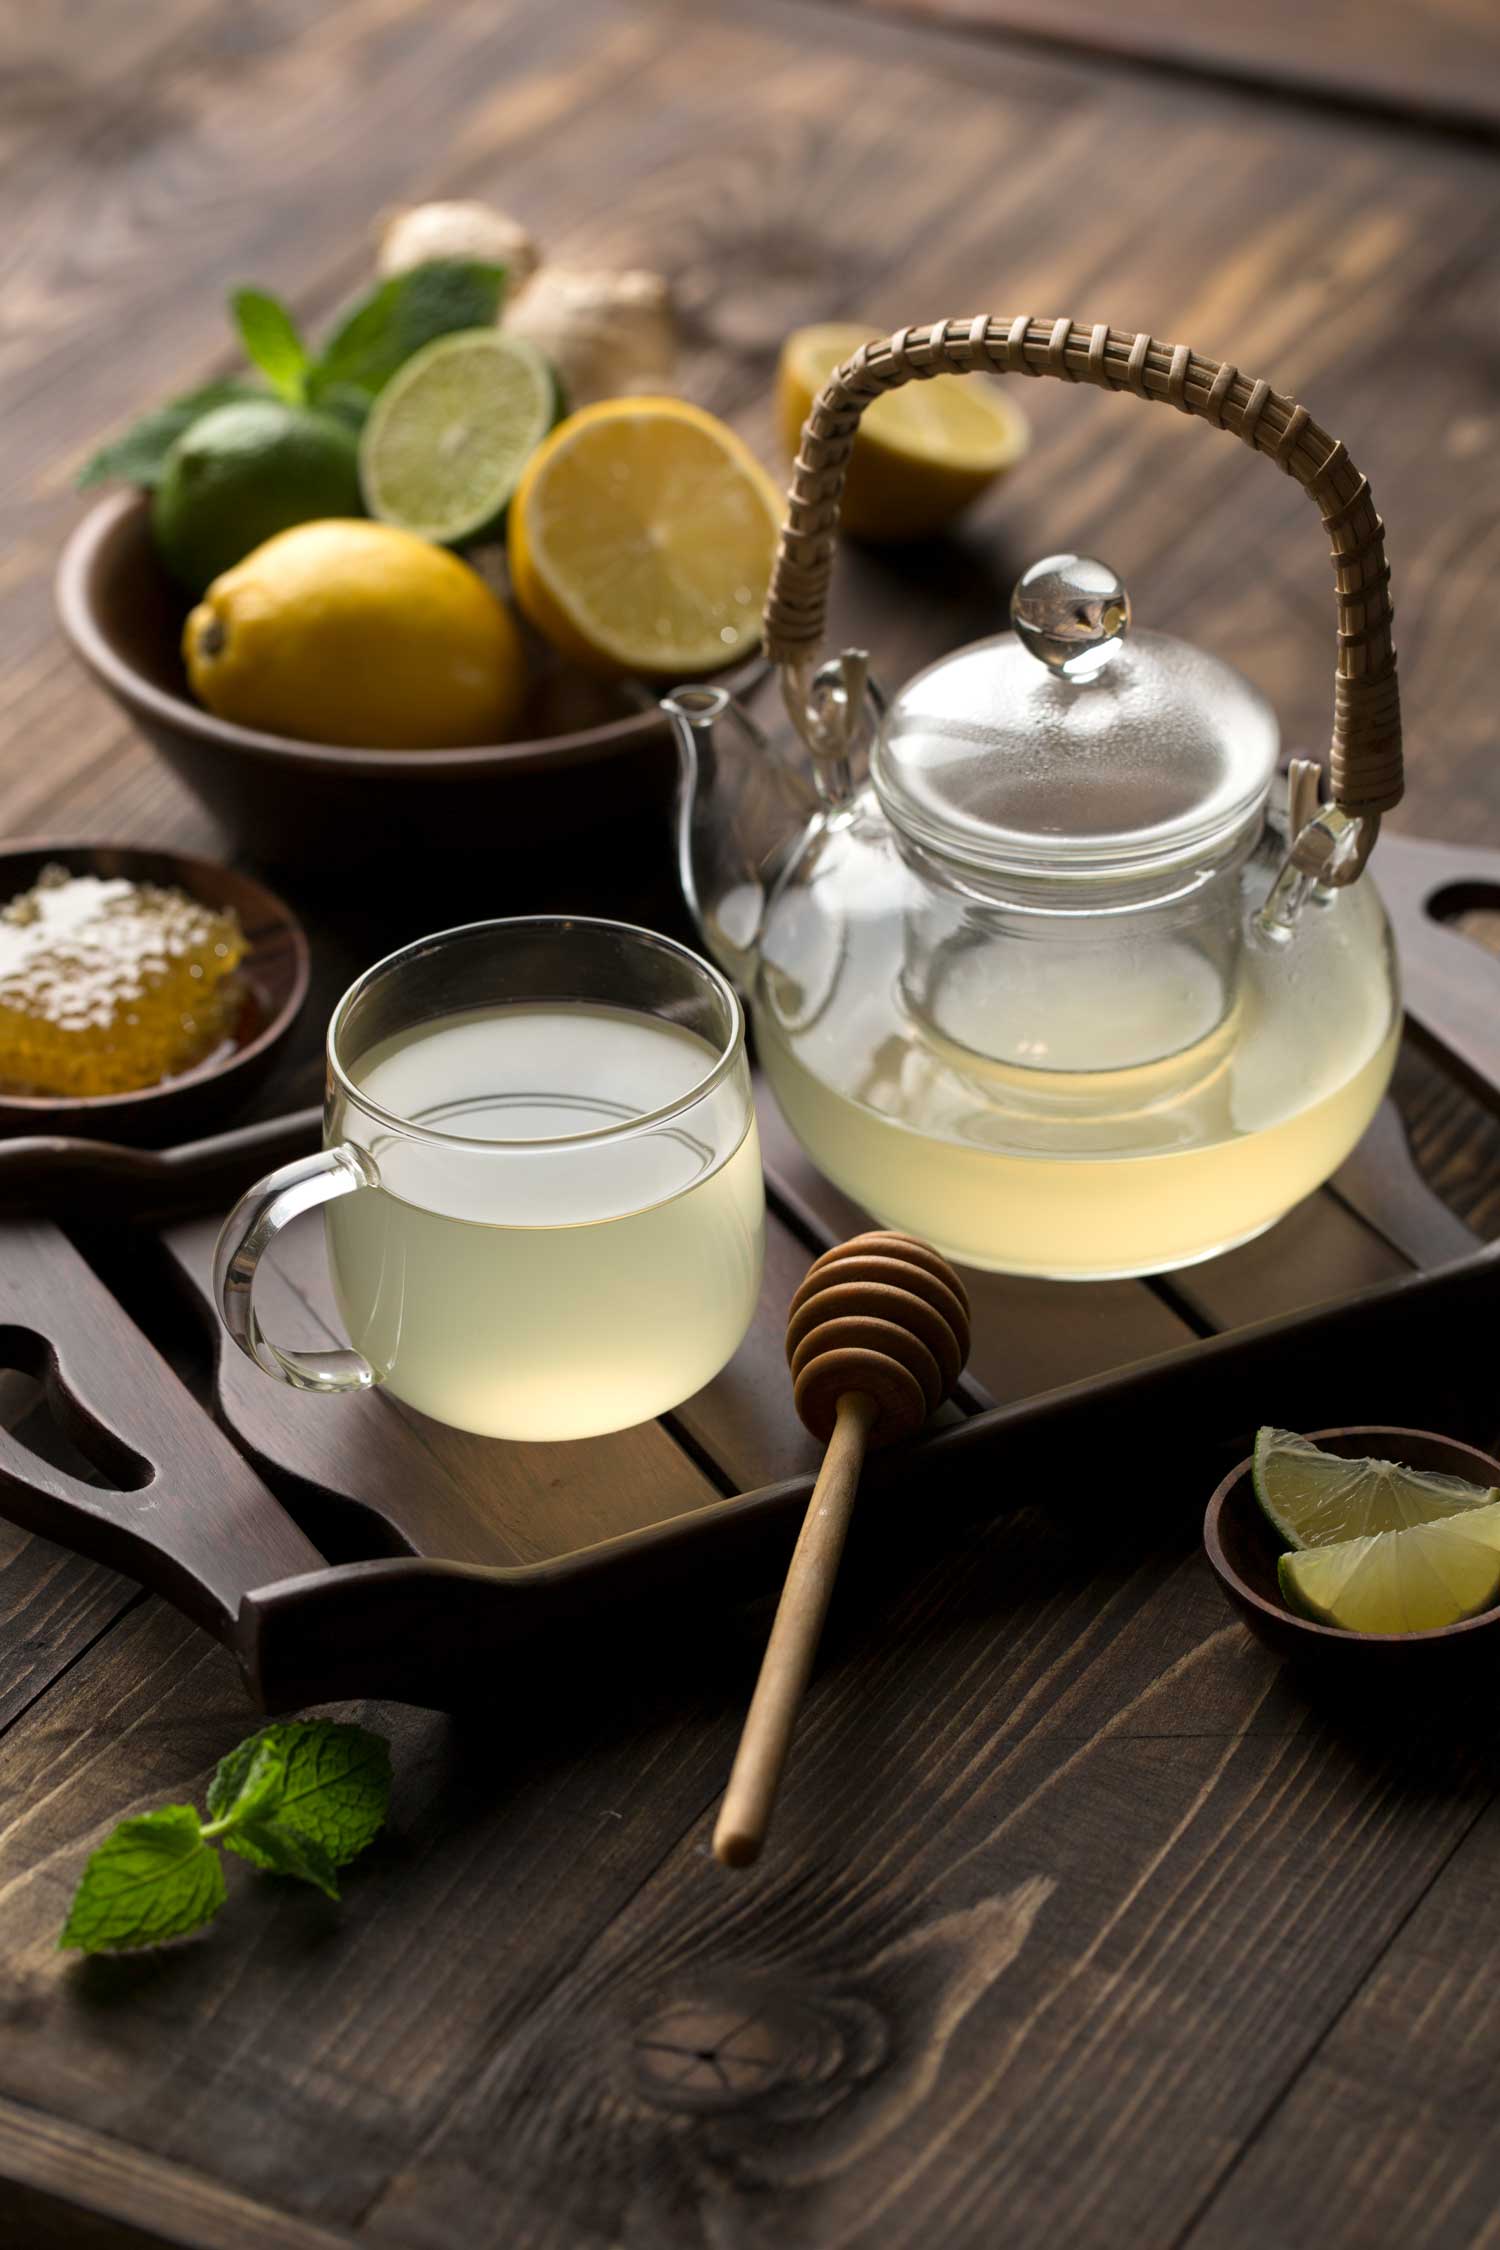 An image of a glass pot of tea and mug on wooden background half filled with a clear cloudy tea with lemons and honey in the background